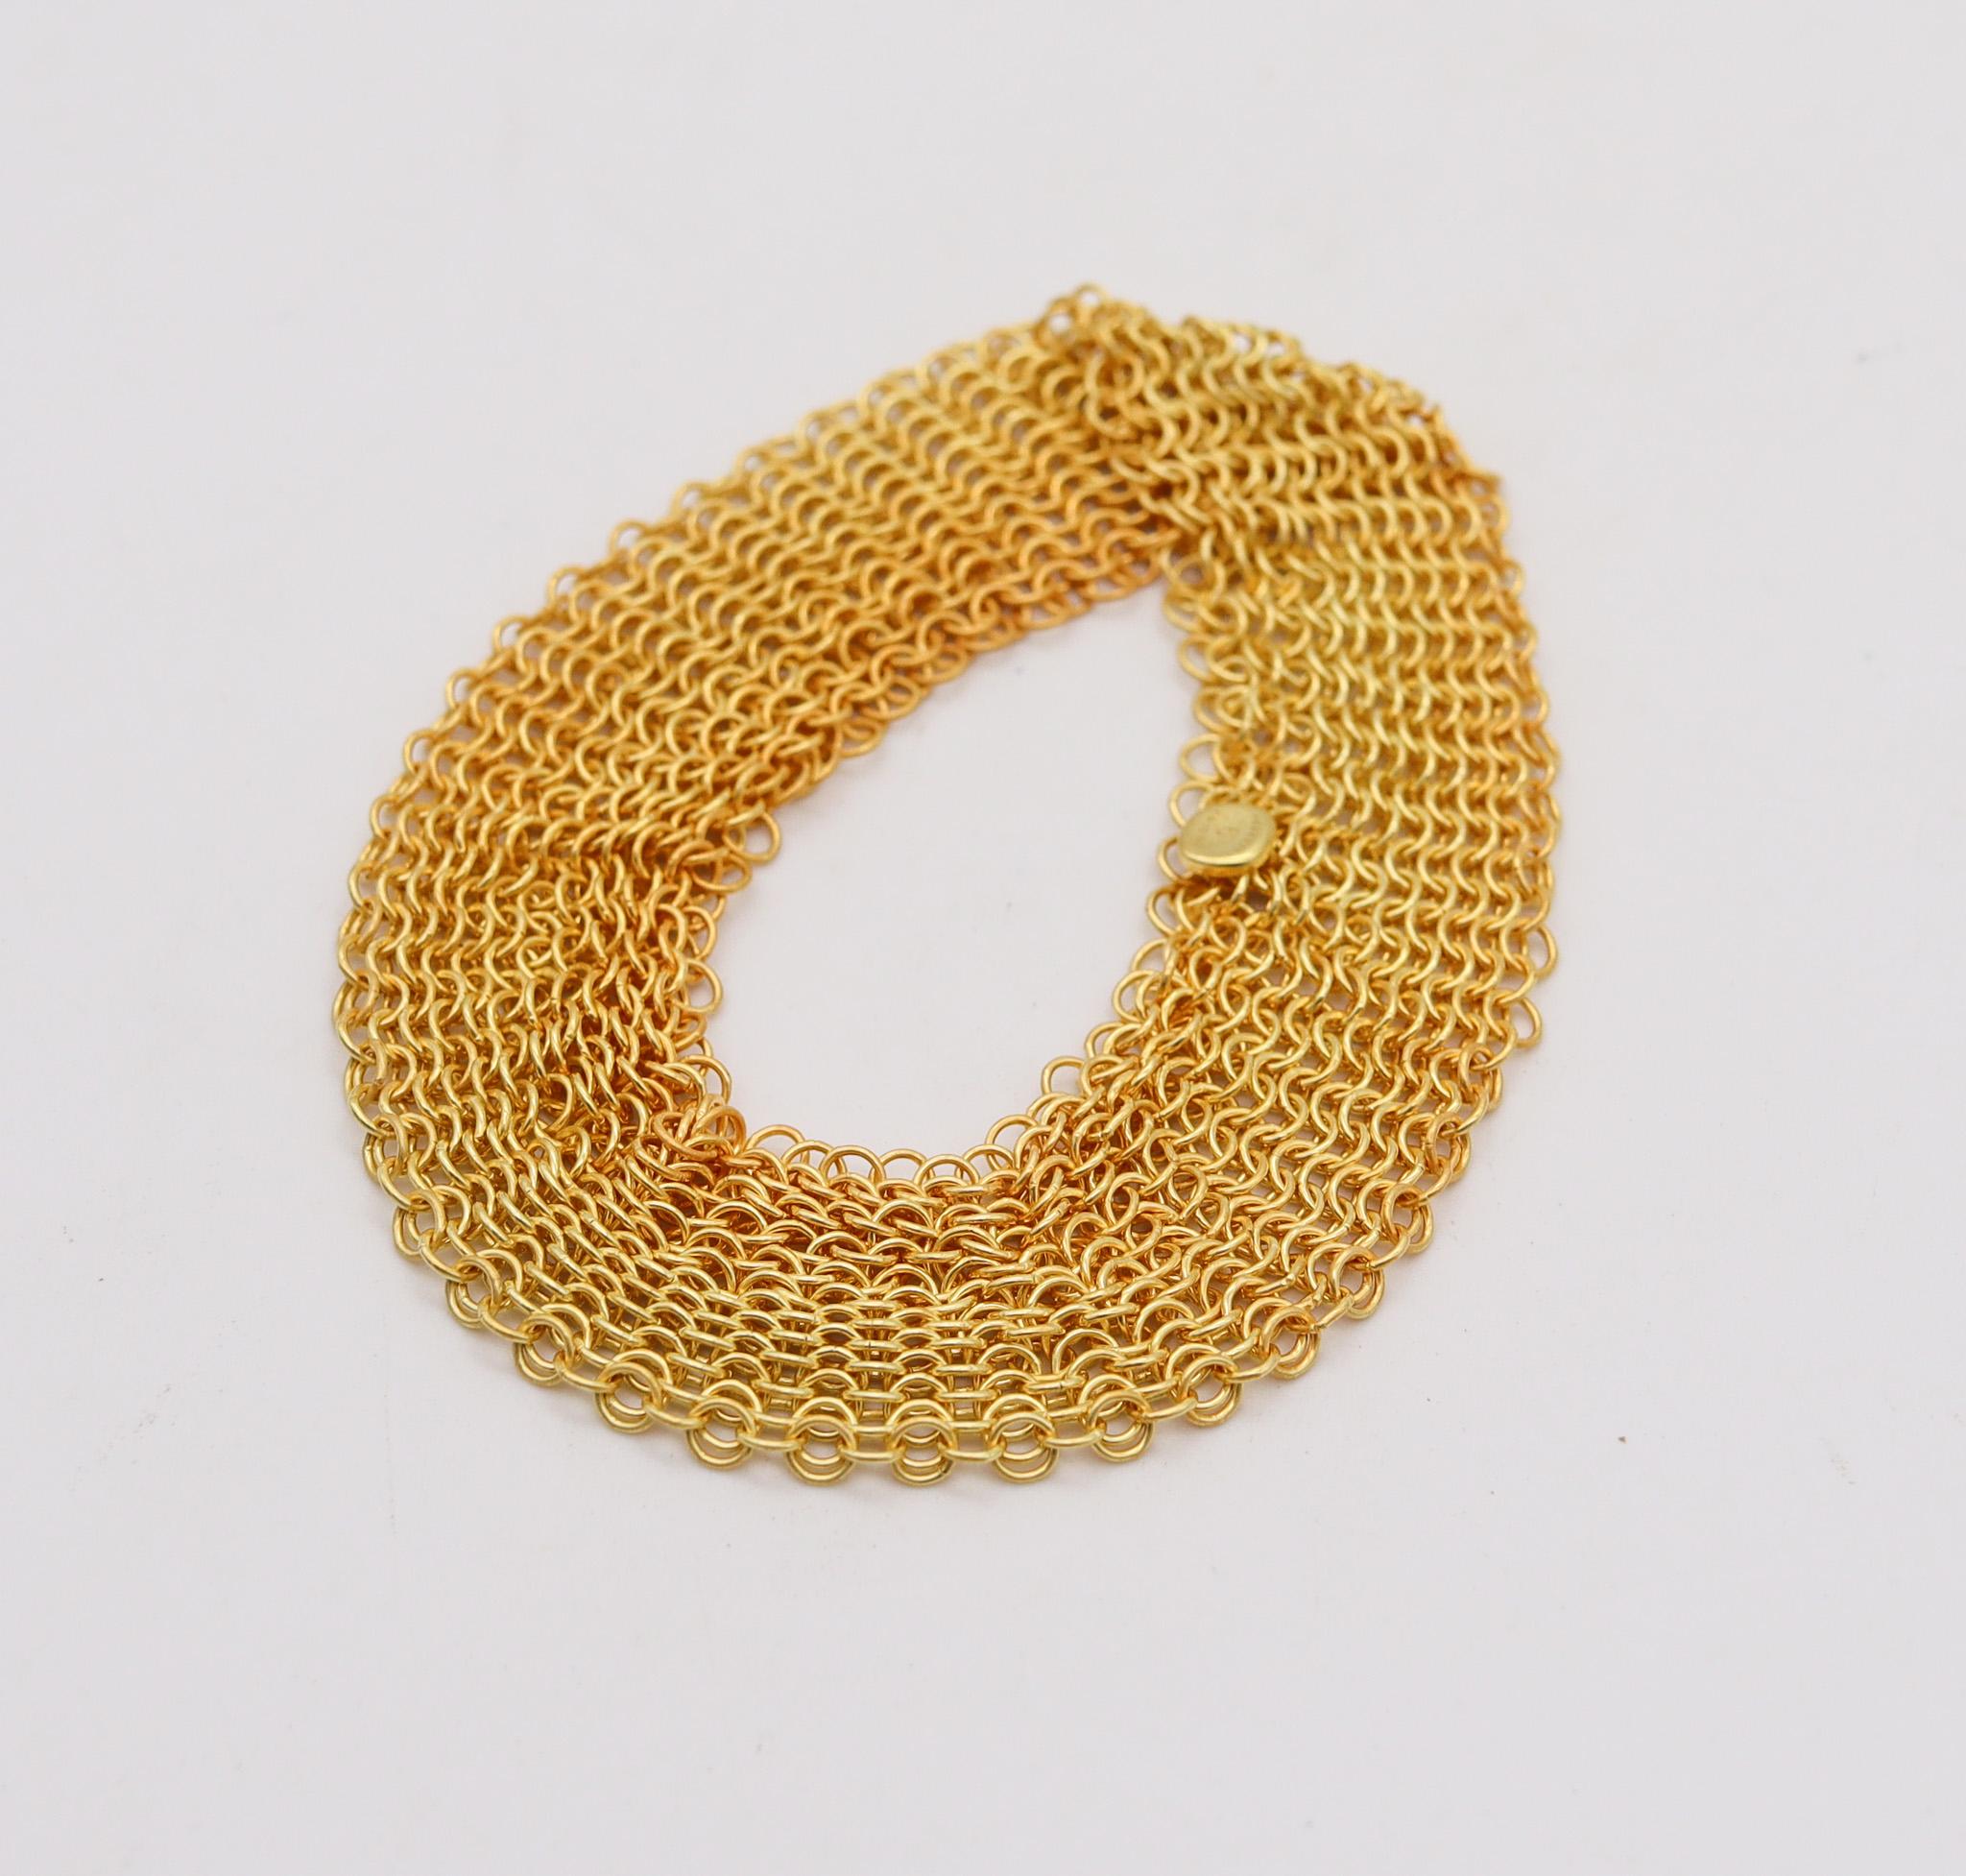 Tiffany & Co. 1982 Elsa Peretti Mesh Bracelet in 18Kt Gold Vermeil Over Sterling In Excellent Condition In Miami, FL